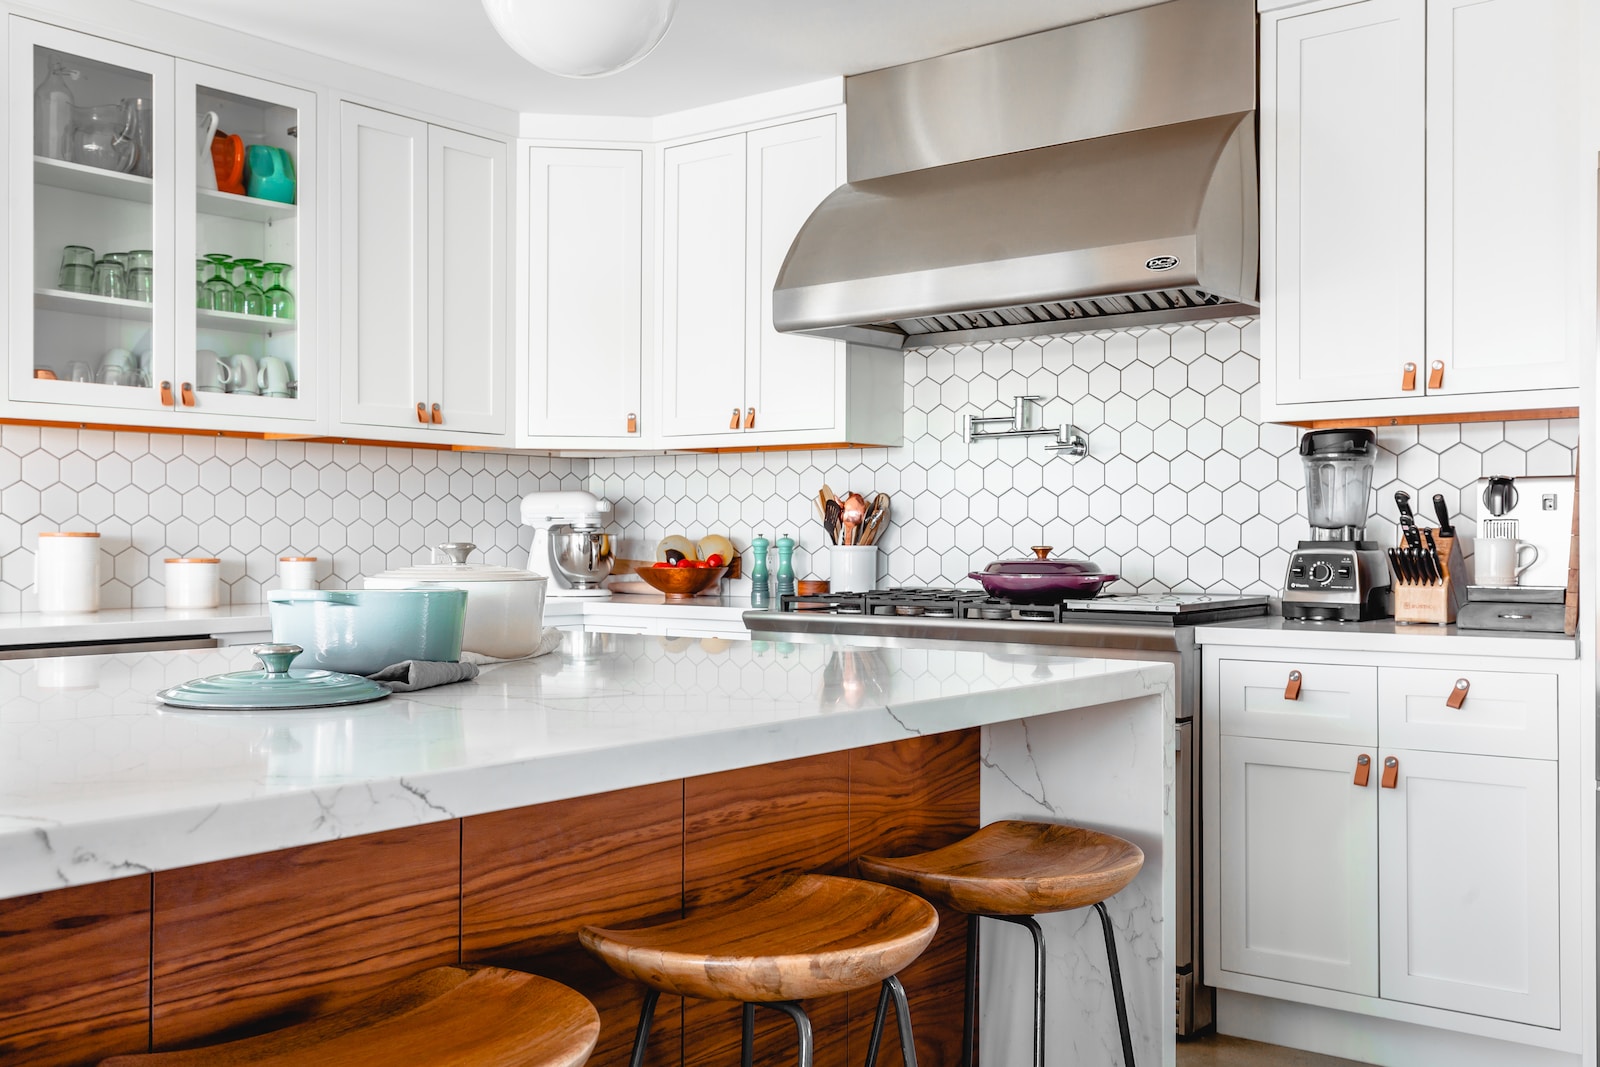 Who Should Organize Your Kitchen? DIY Vs. Professional Help